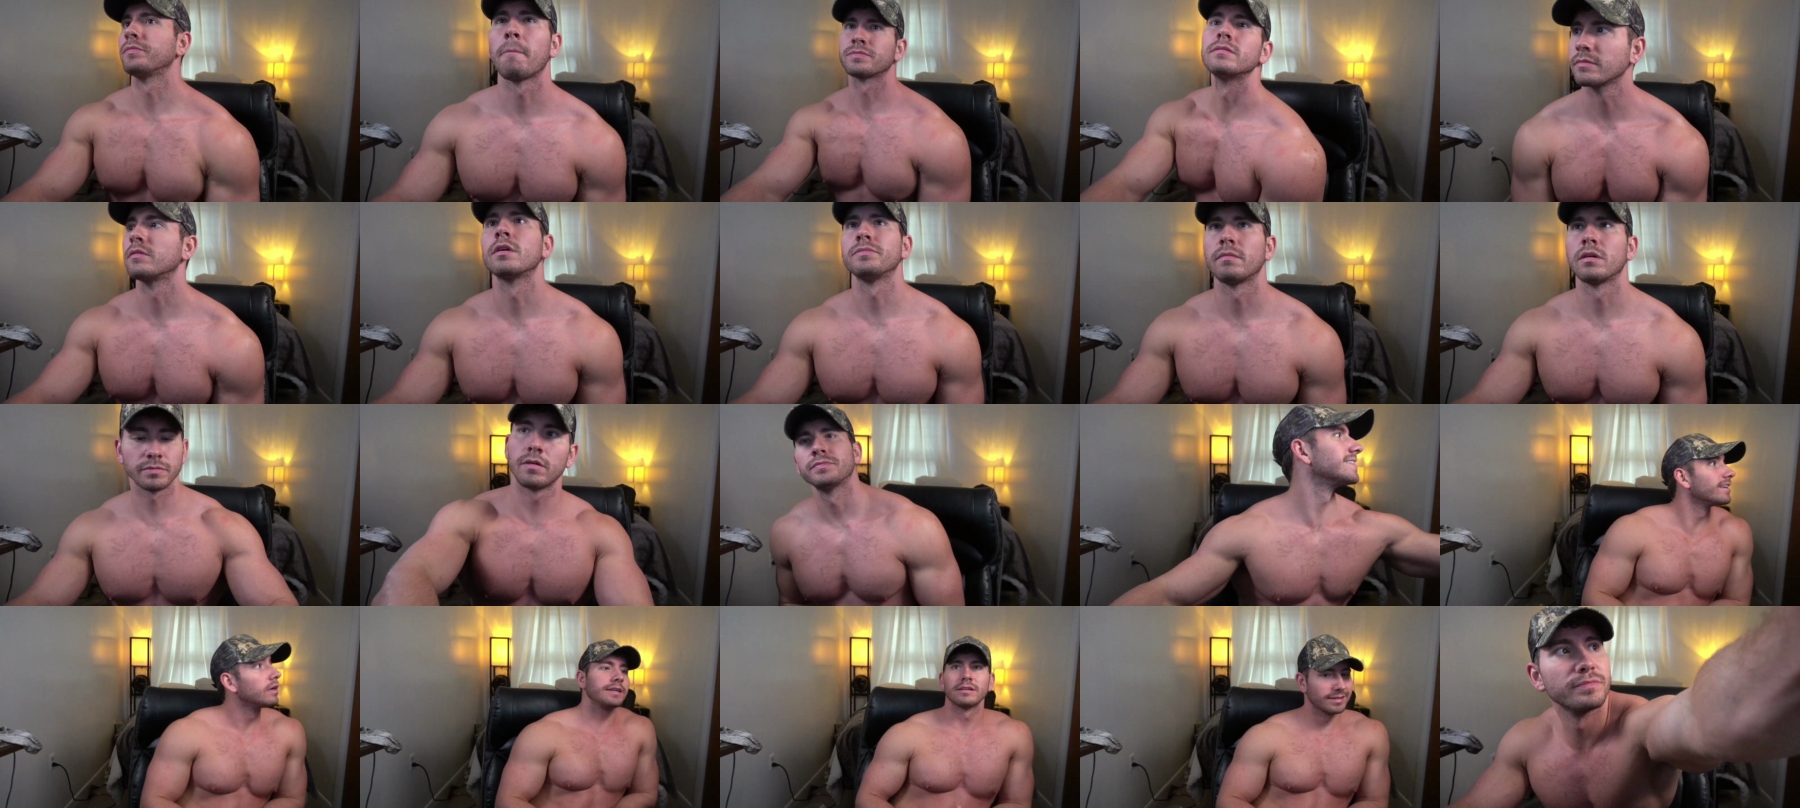 Hotmuscles6t9  04-11-2021 Male Show